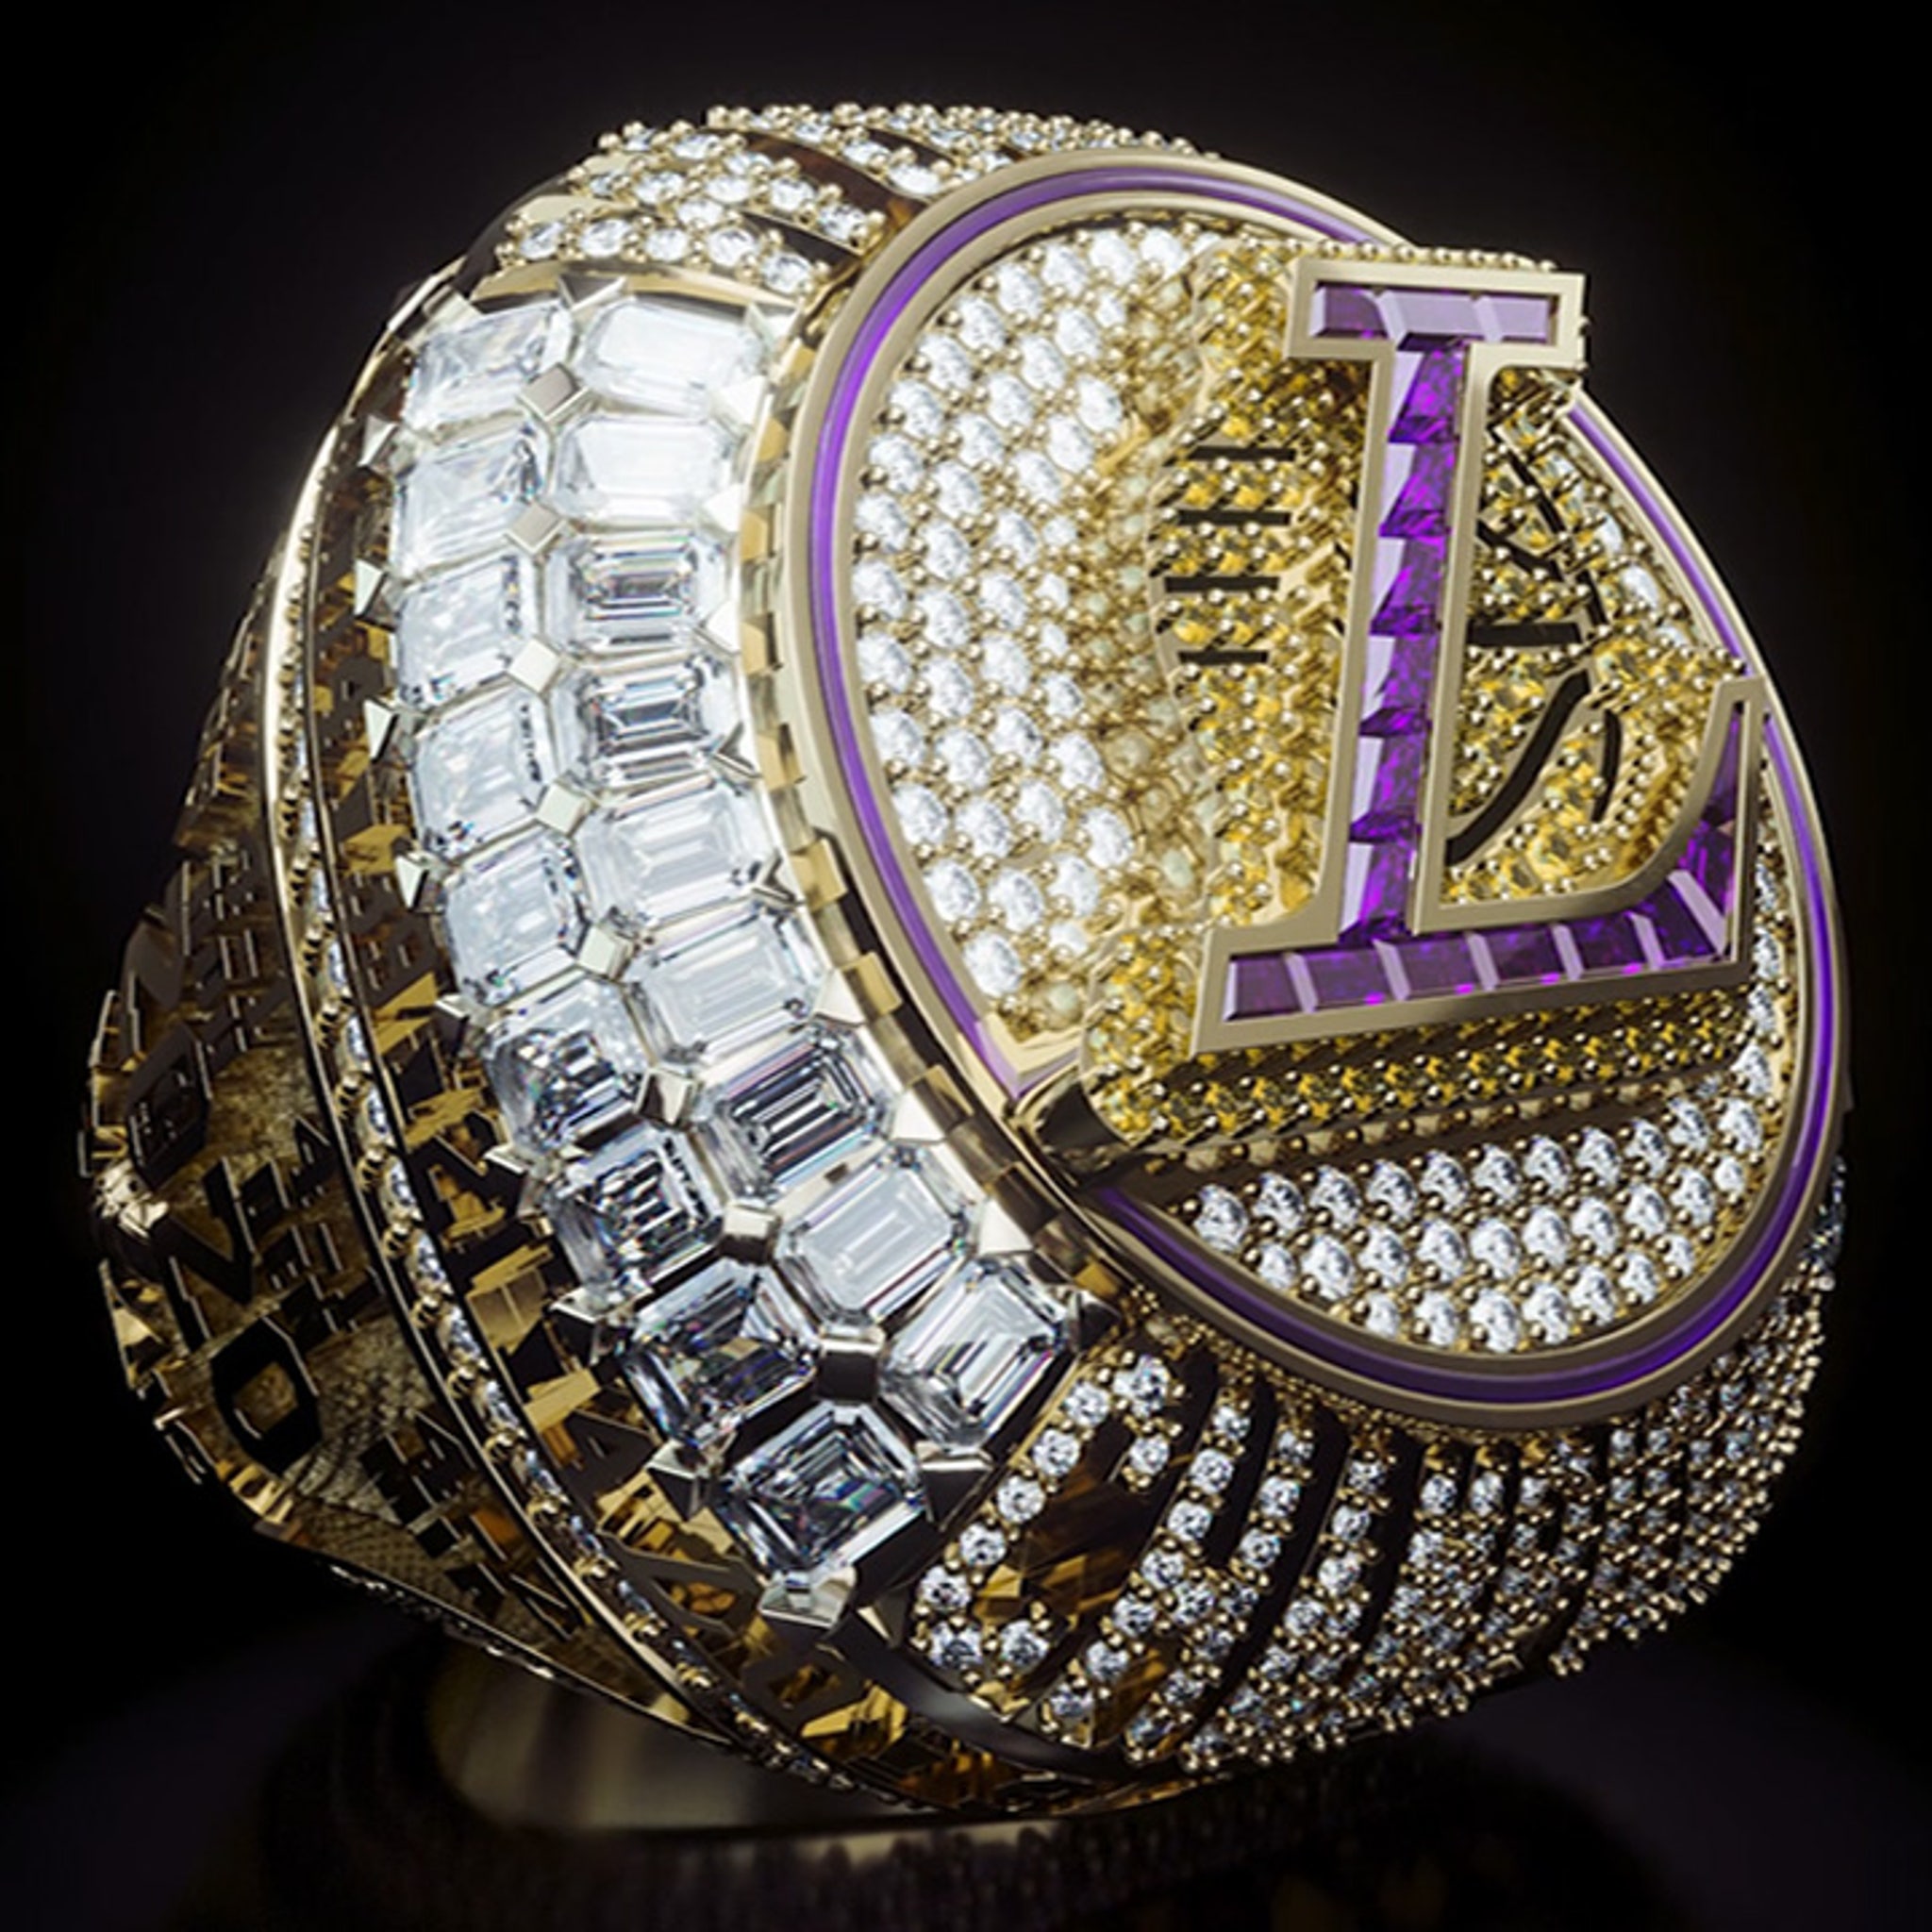 2020 Lakers Championship Ring 2020 Official Version Detachable